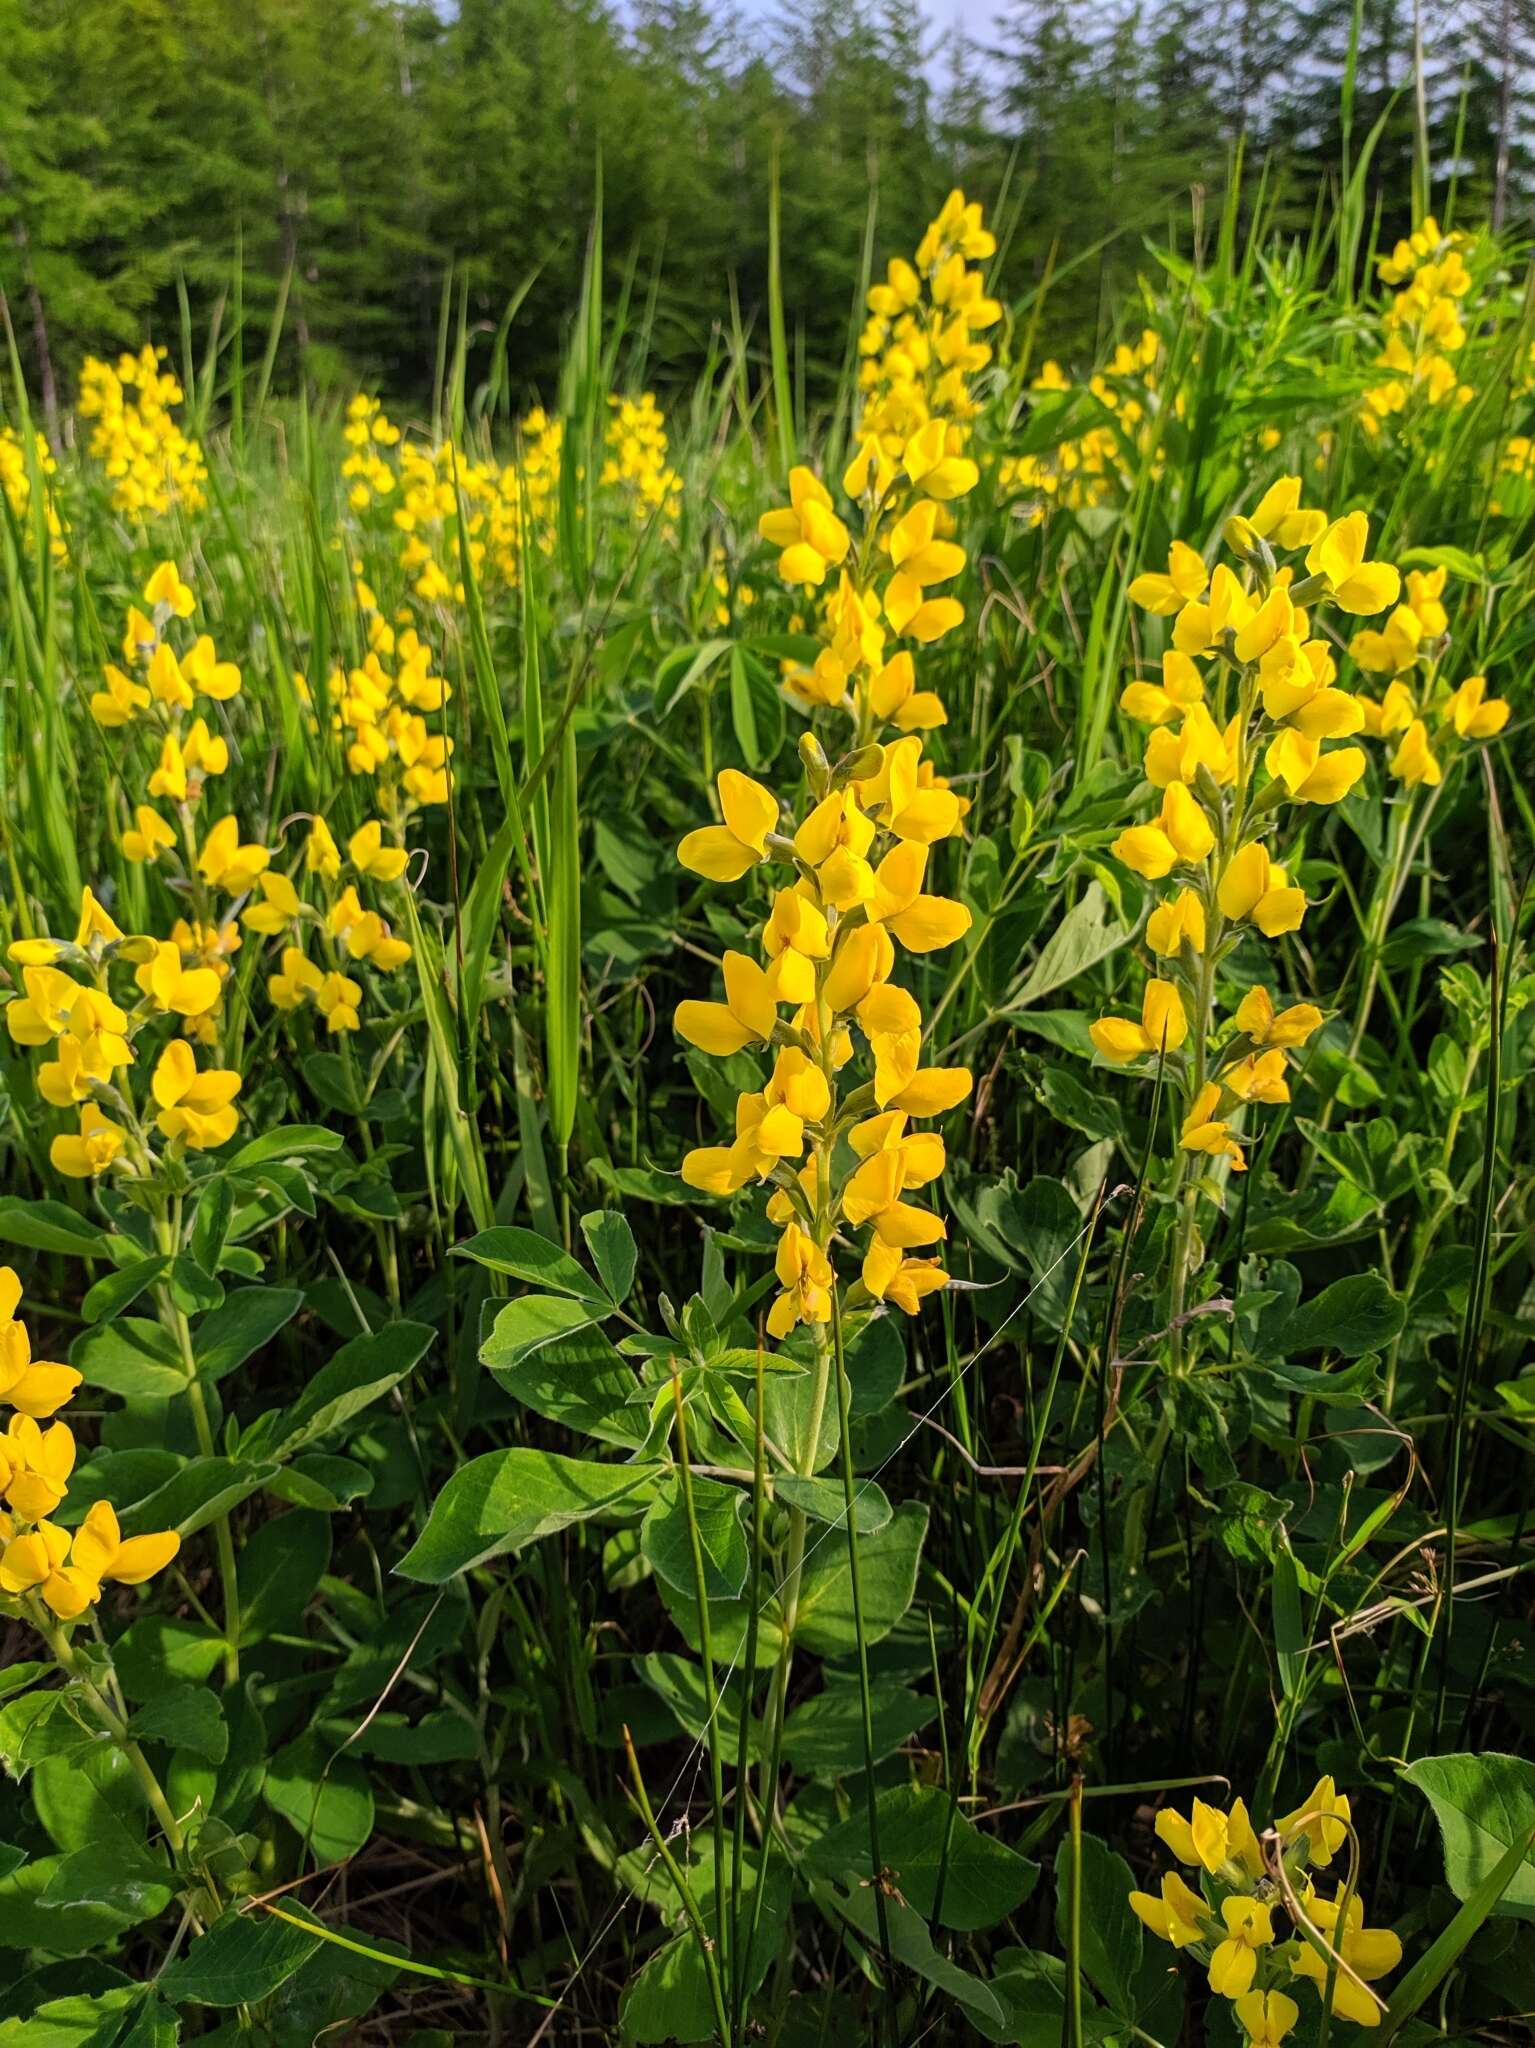 Image of Thermopsis lupinoides (L.) Link